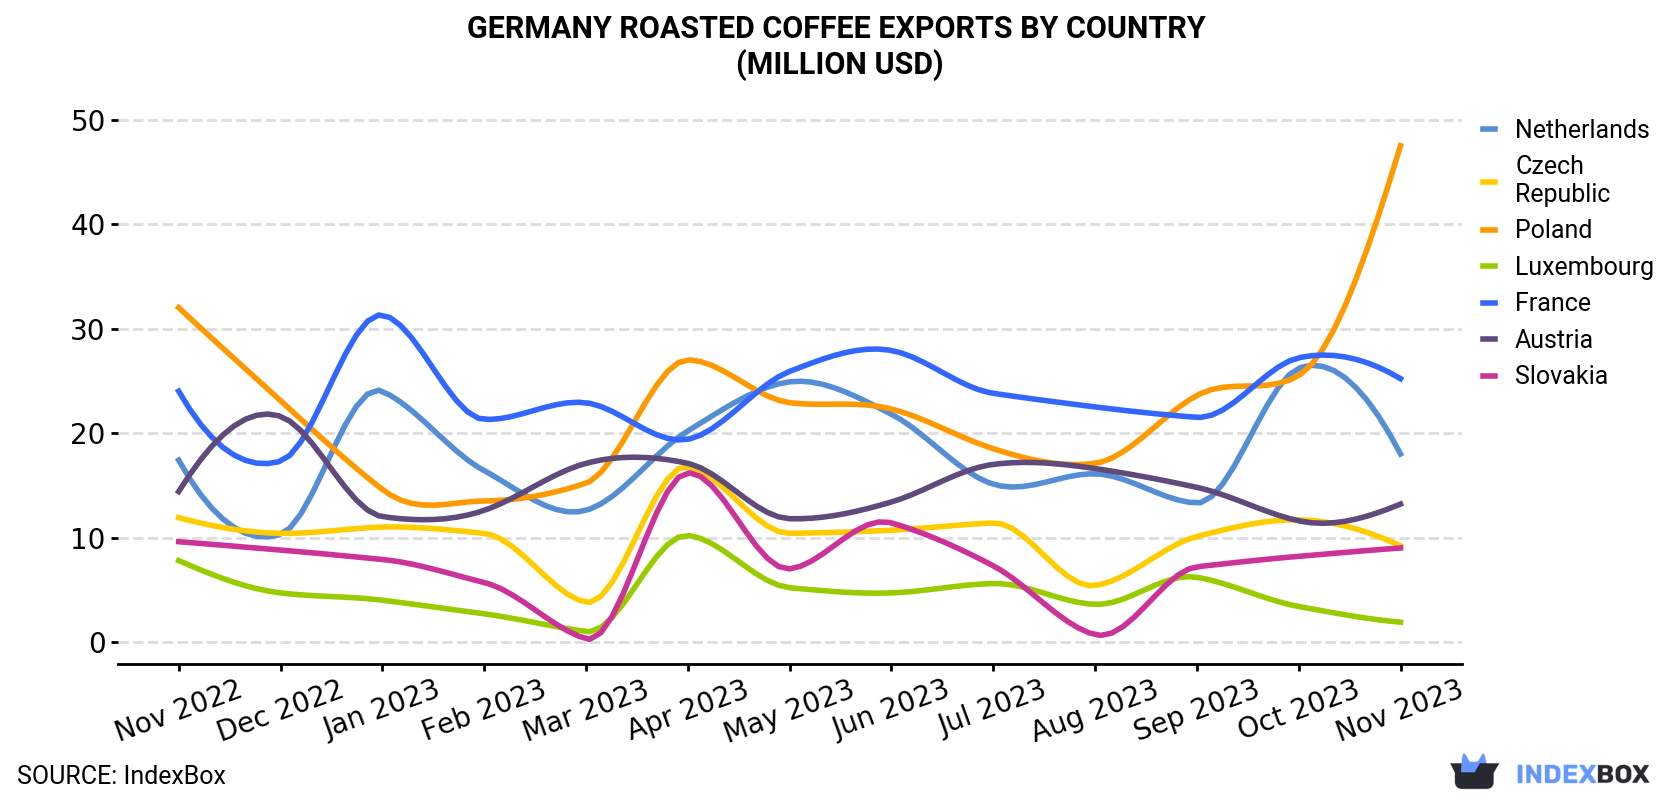 Germany Roasted Coffee Exports By Country (Million USD)